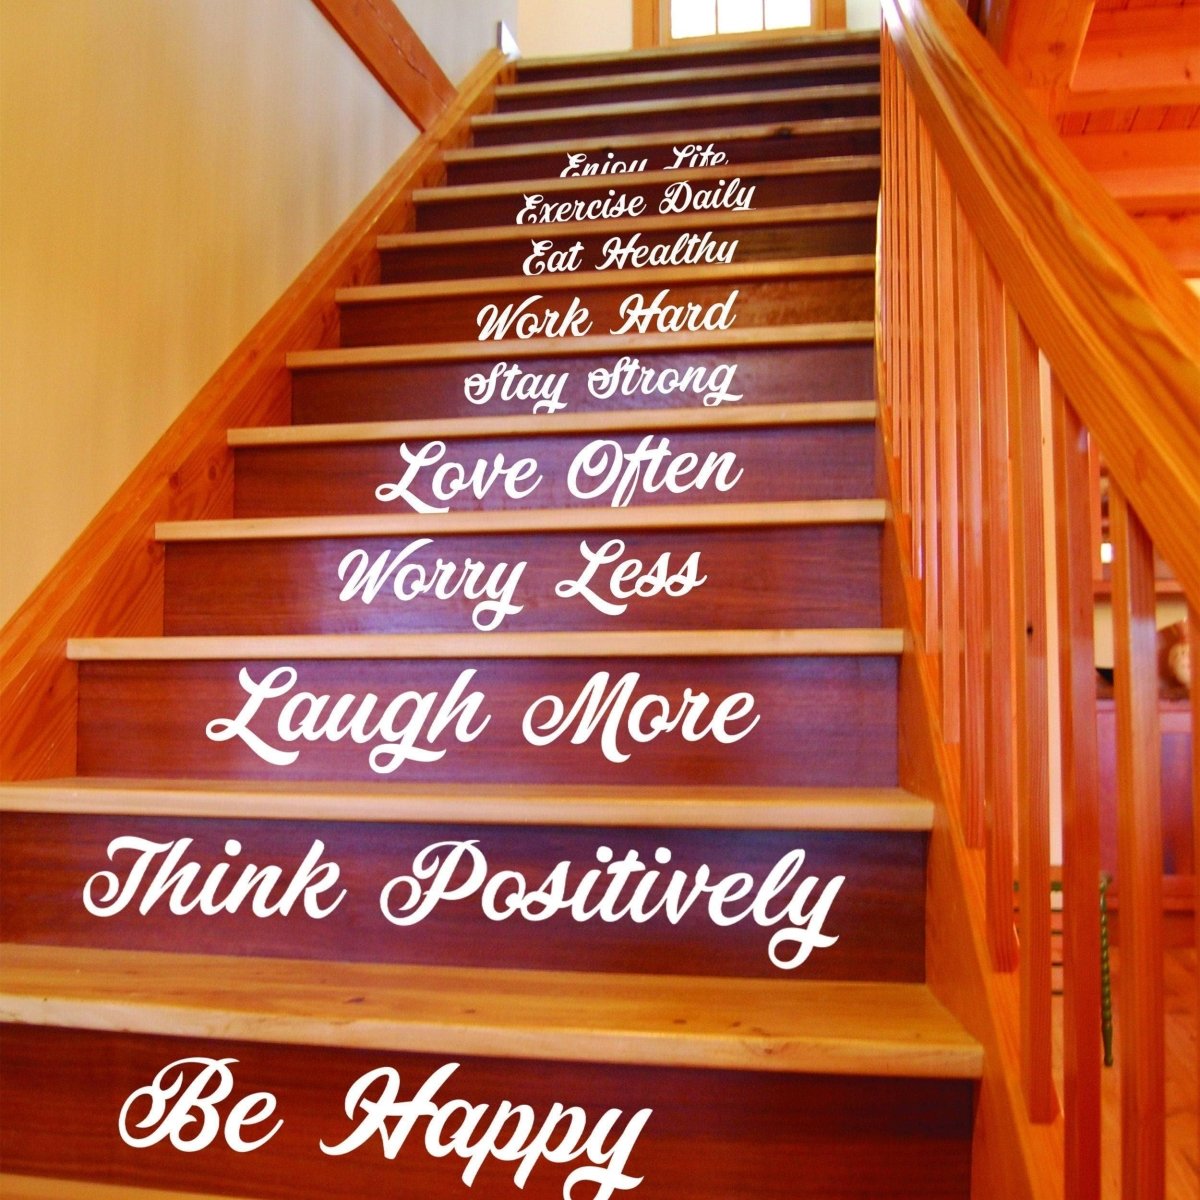 Elegant Stairway Inspirations: Vinyl Decals for a Stunning Home Staircase - Decords